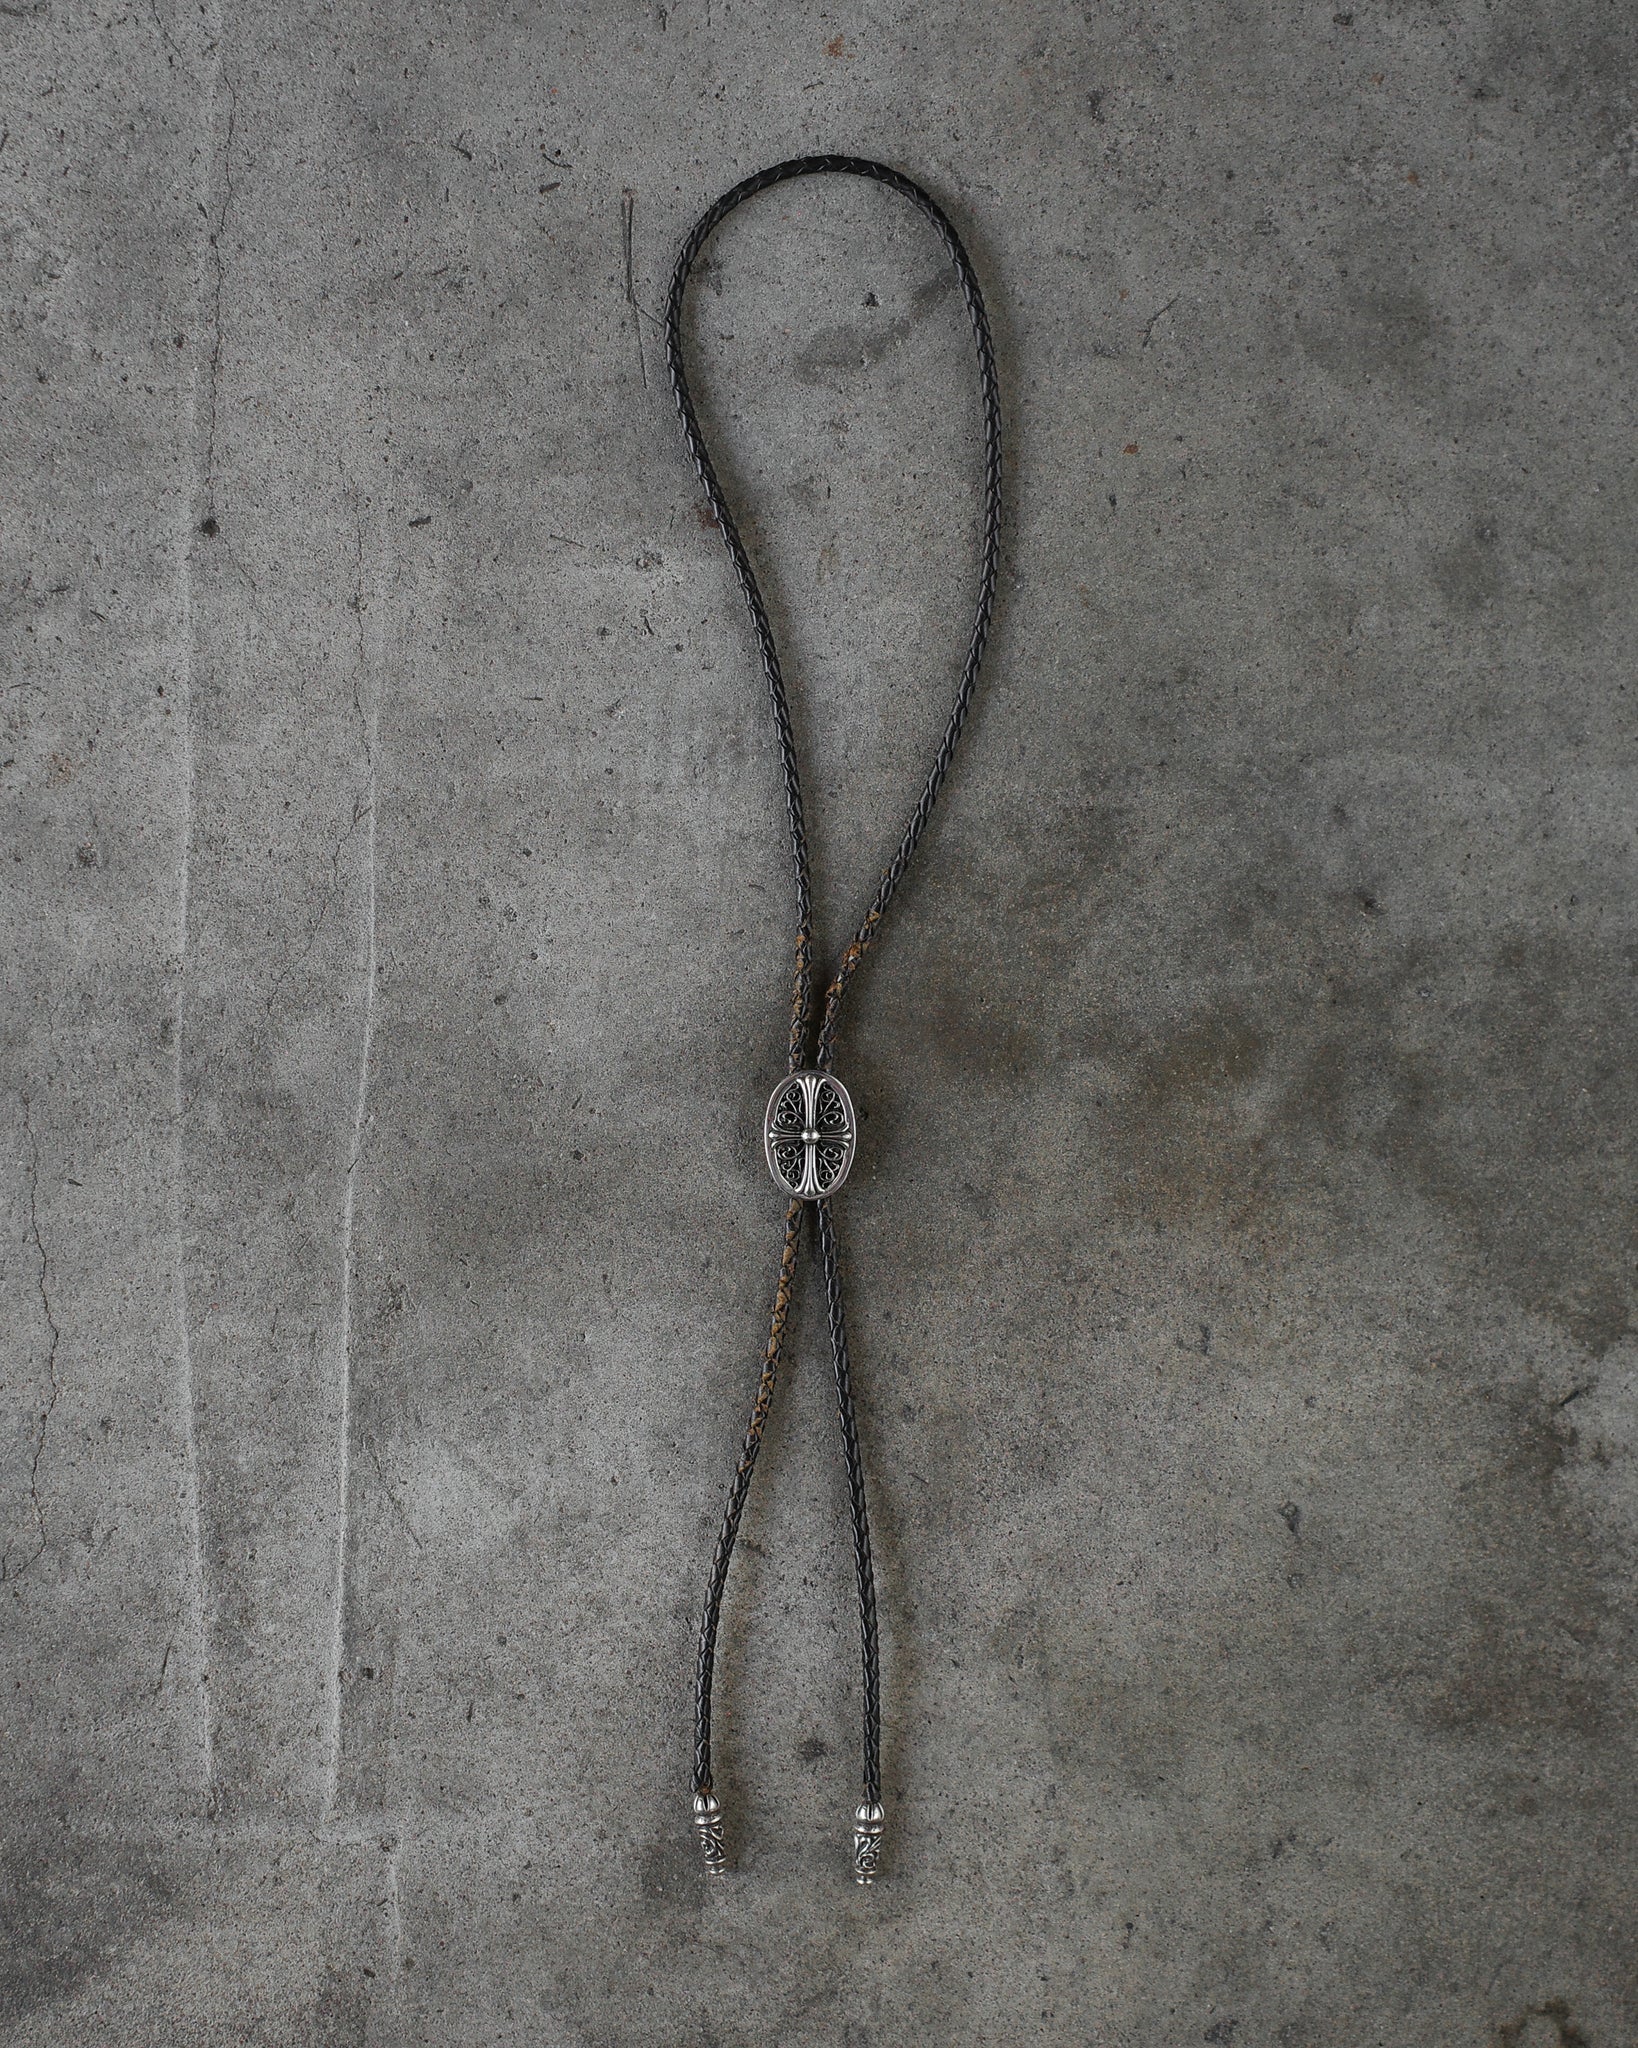 Chrome Hearts Classic Cross Braided Leather Bolo Tie